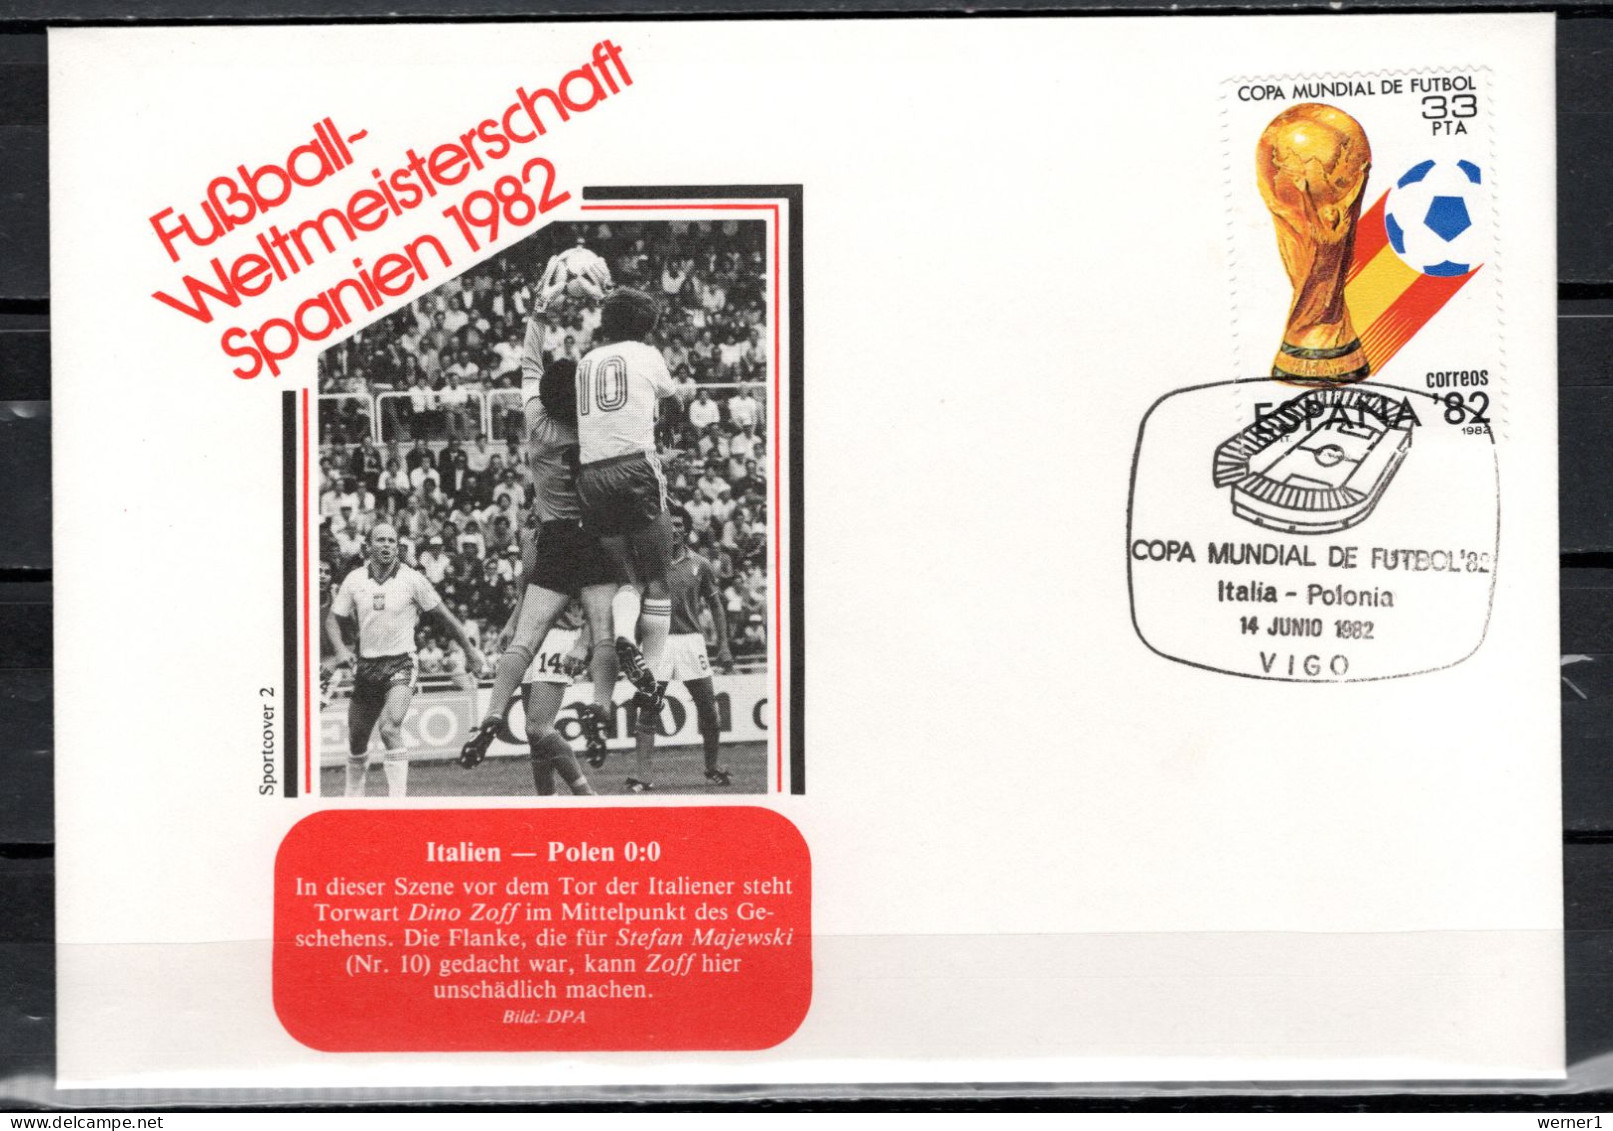 Spain 1982 Football Soccer World Cup Commemorative Cover Match Italy - Poland 0:0 - 1982 – Spain